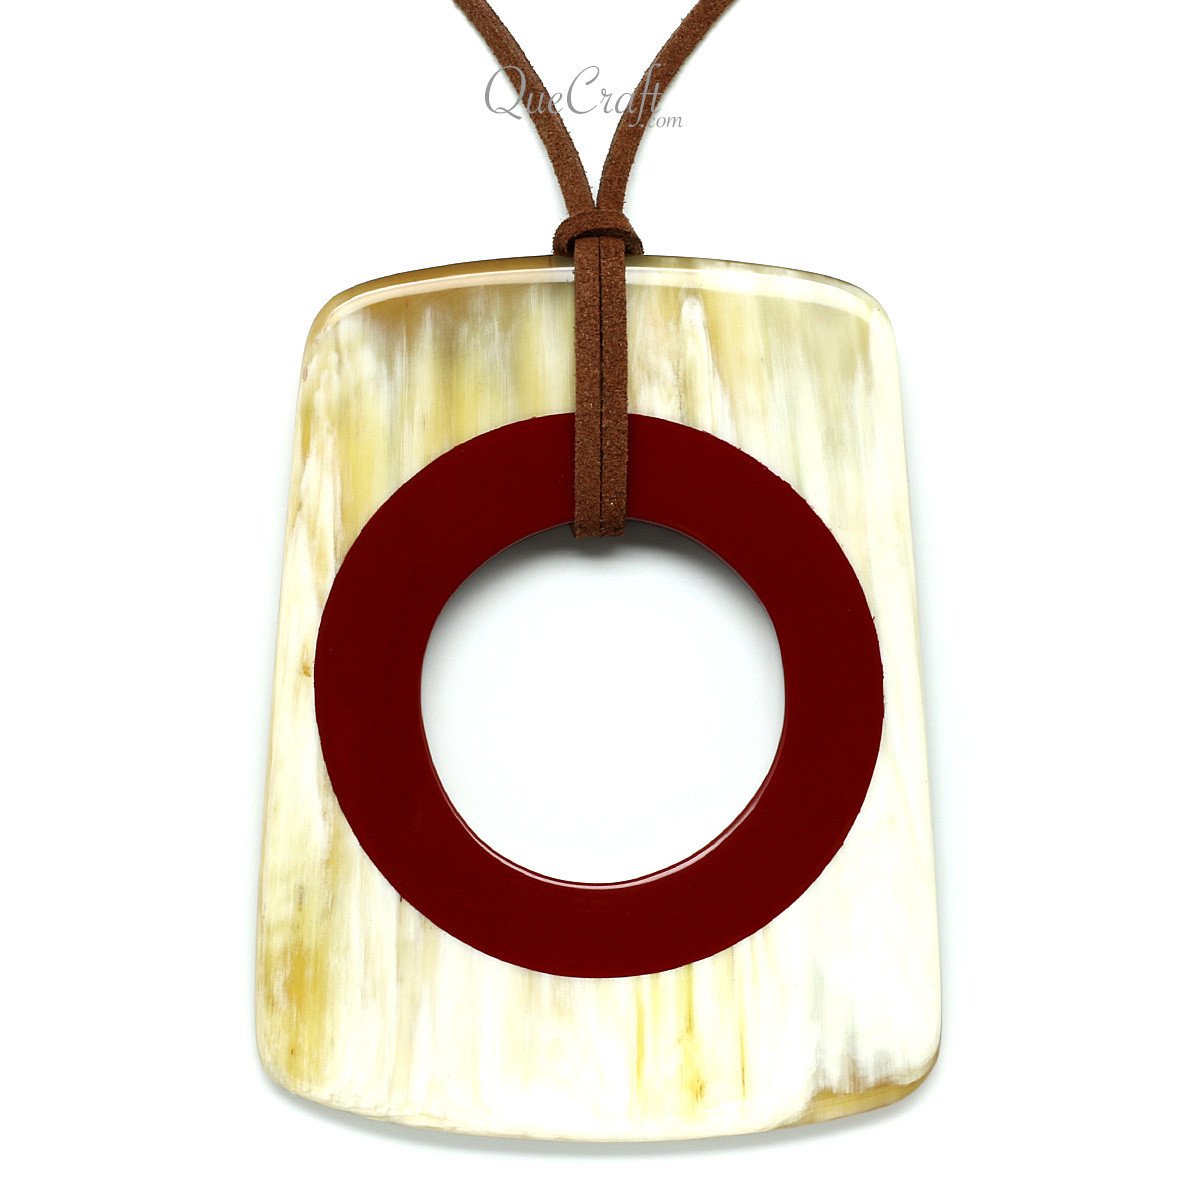 Horn & Lacquer Pendant #11721 - HORN JEWELRY